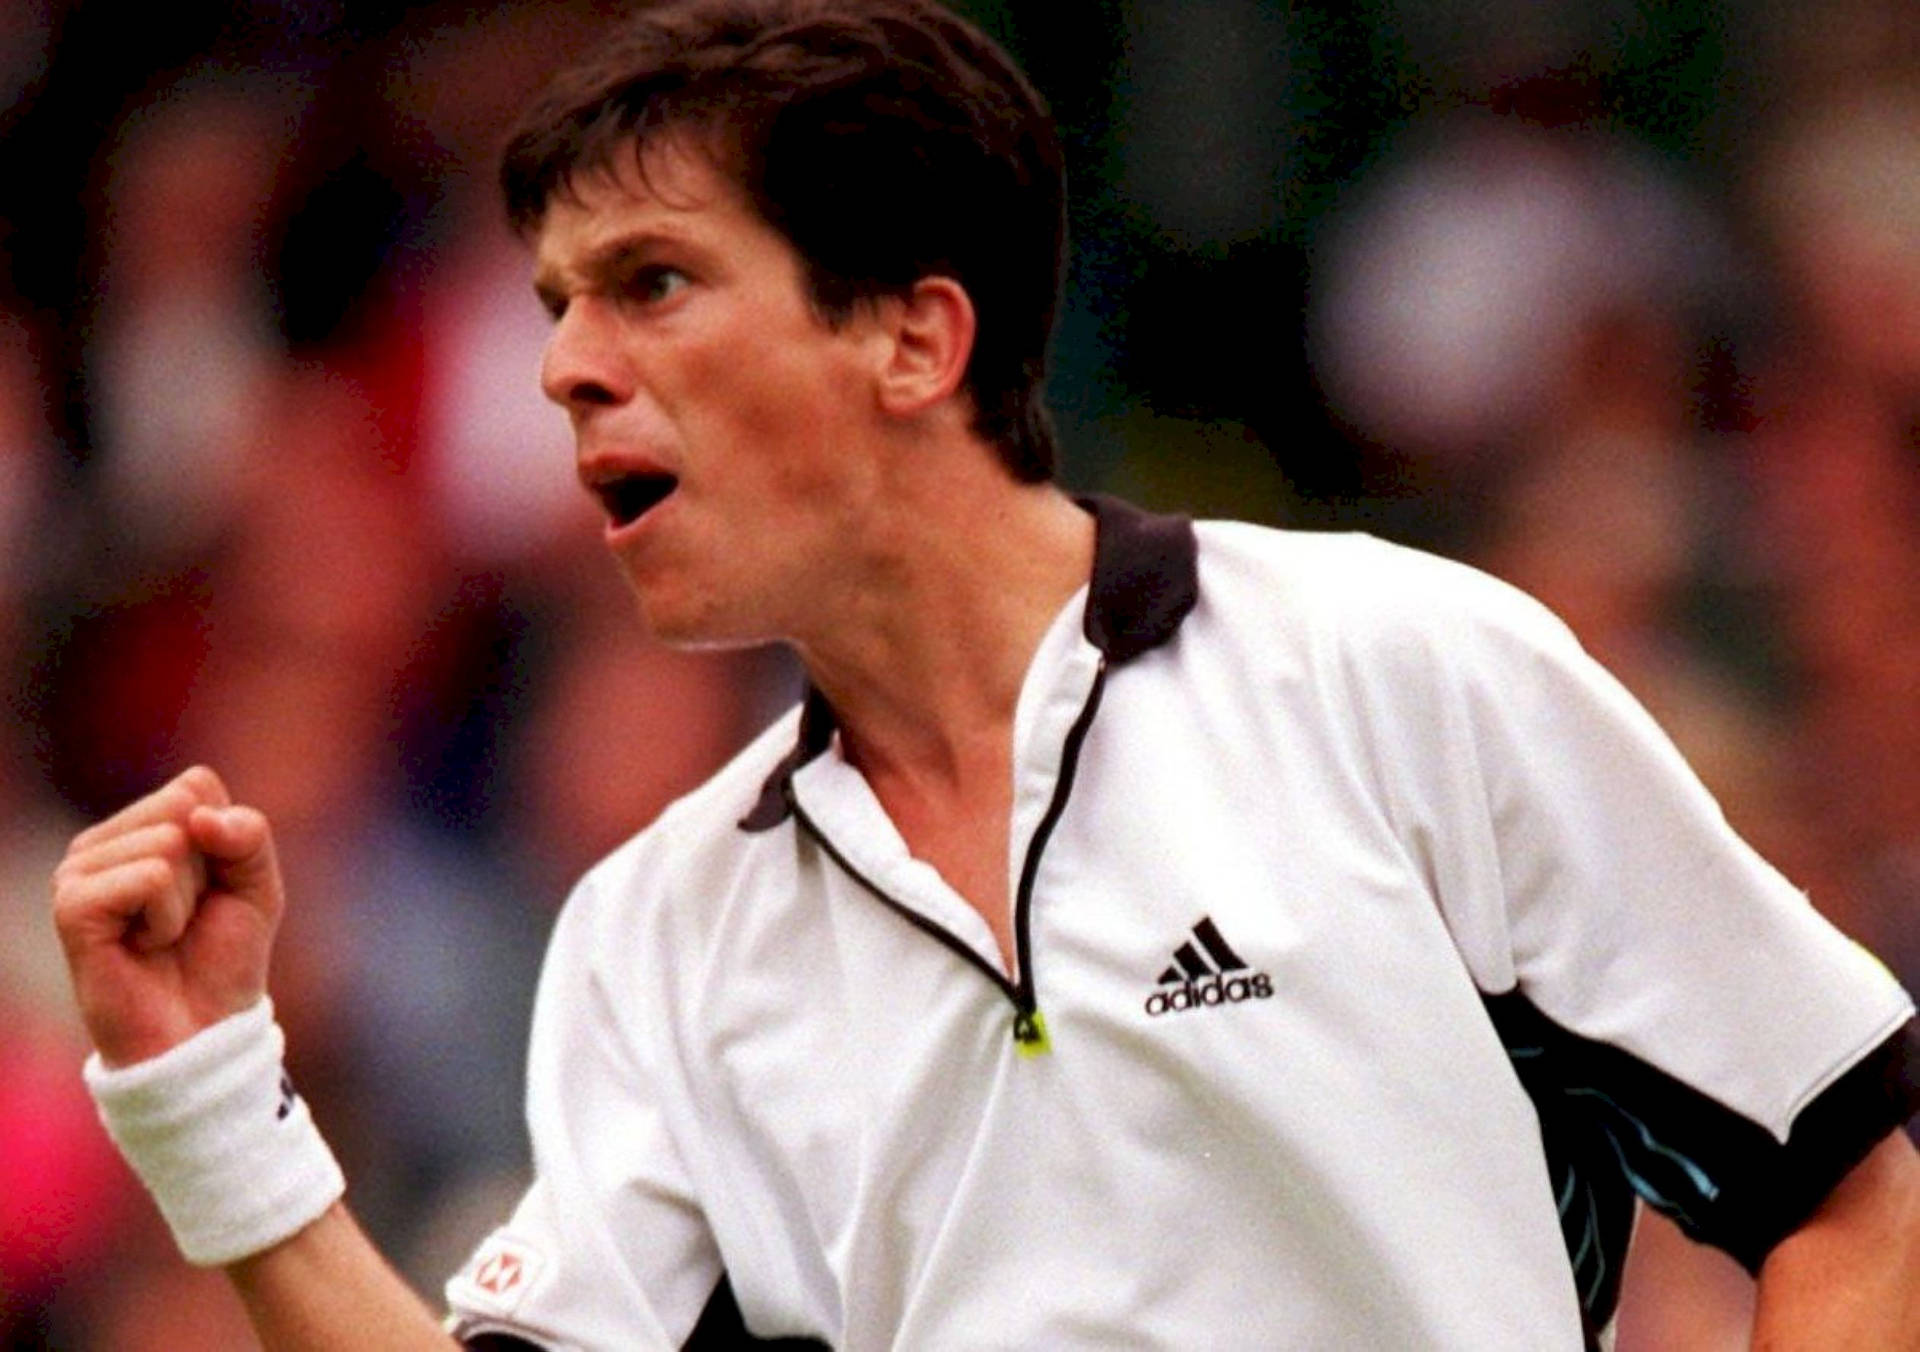 Perfillateral Del Joven Tim Henman. (this Sentence Refers To A Computer Or Mobile Wallpaper Featuring A Side Profile Of A Young Tim Henman.) Fondo de pantalla